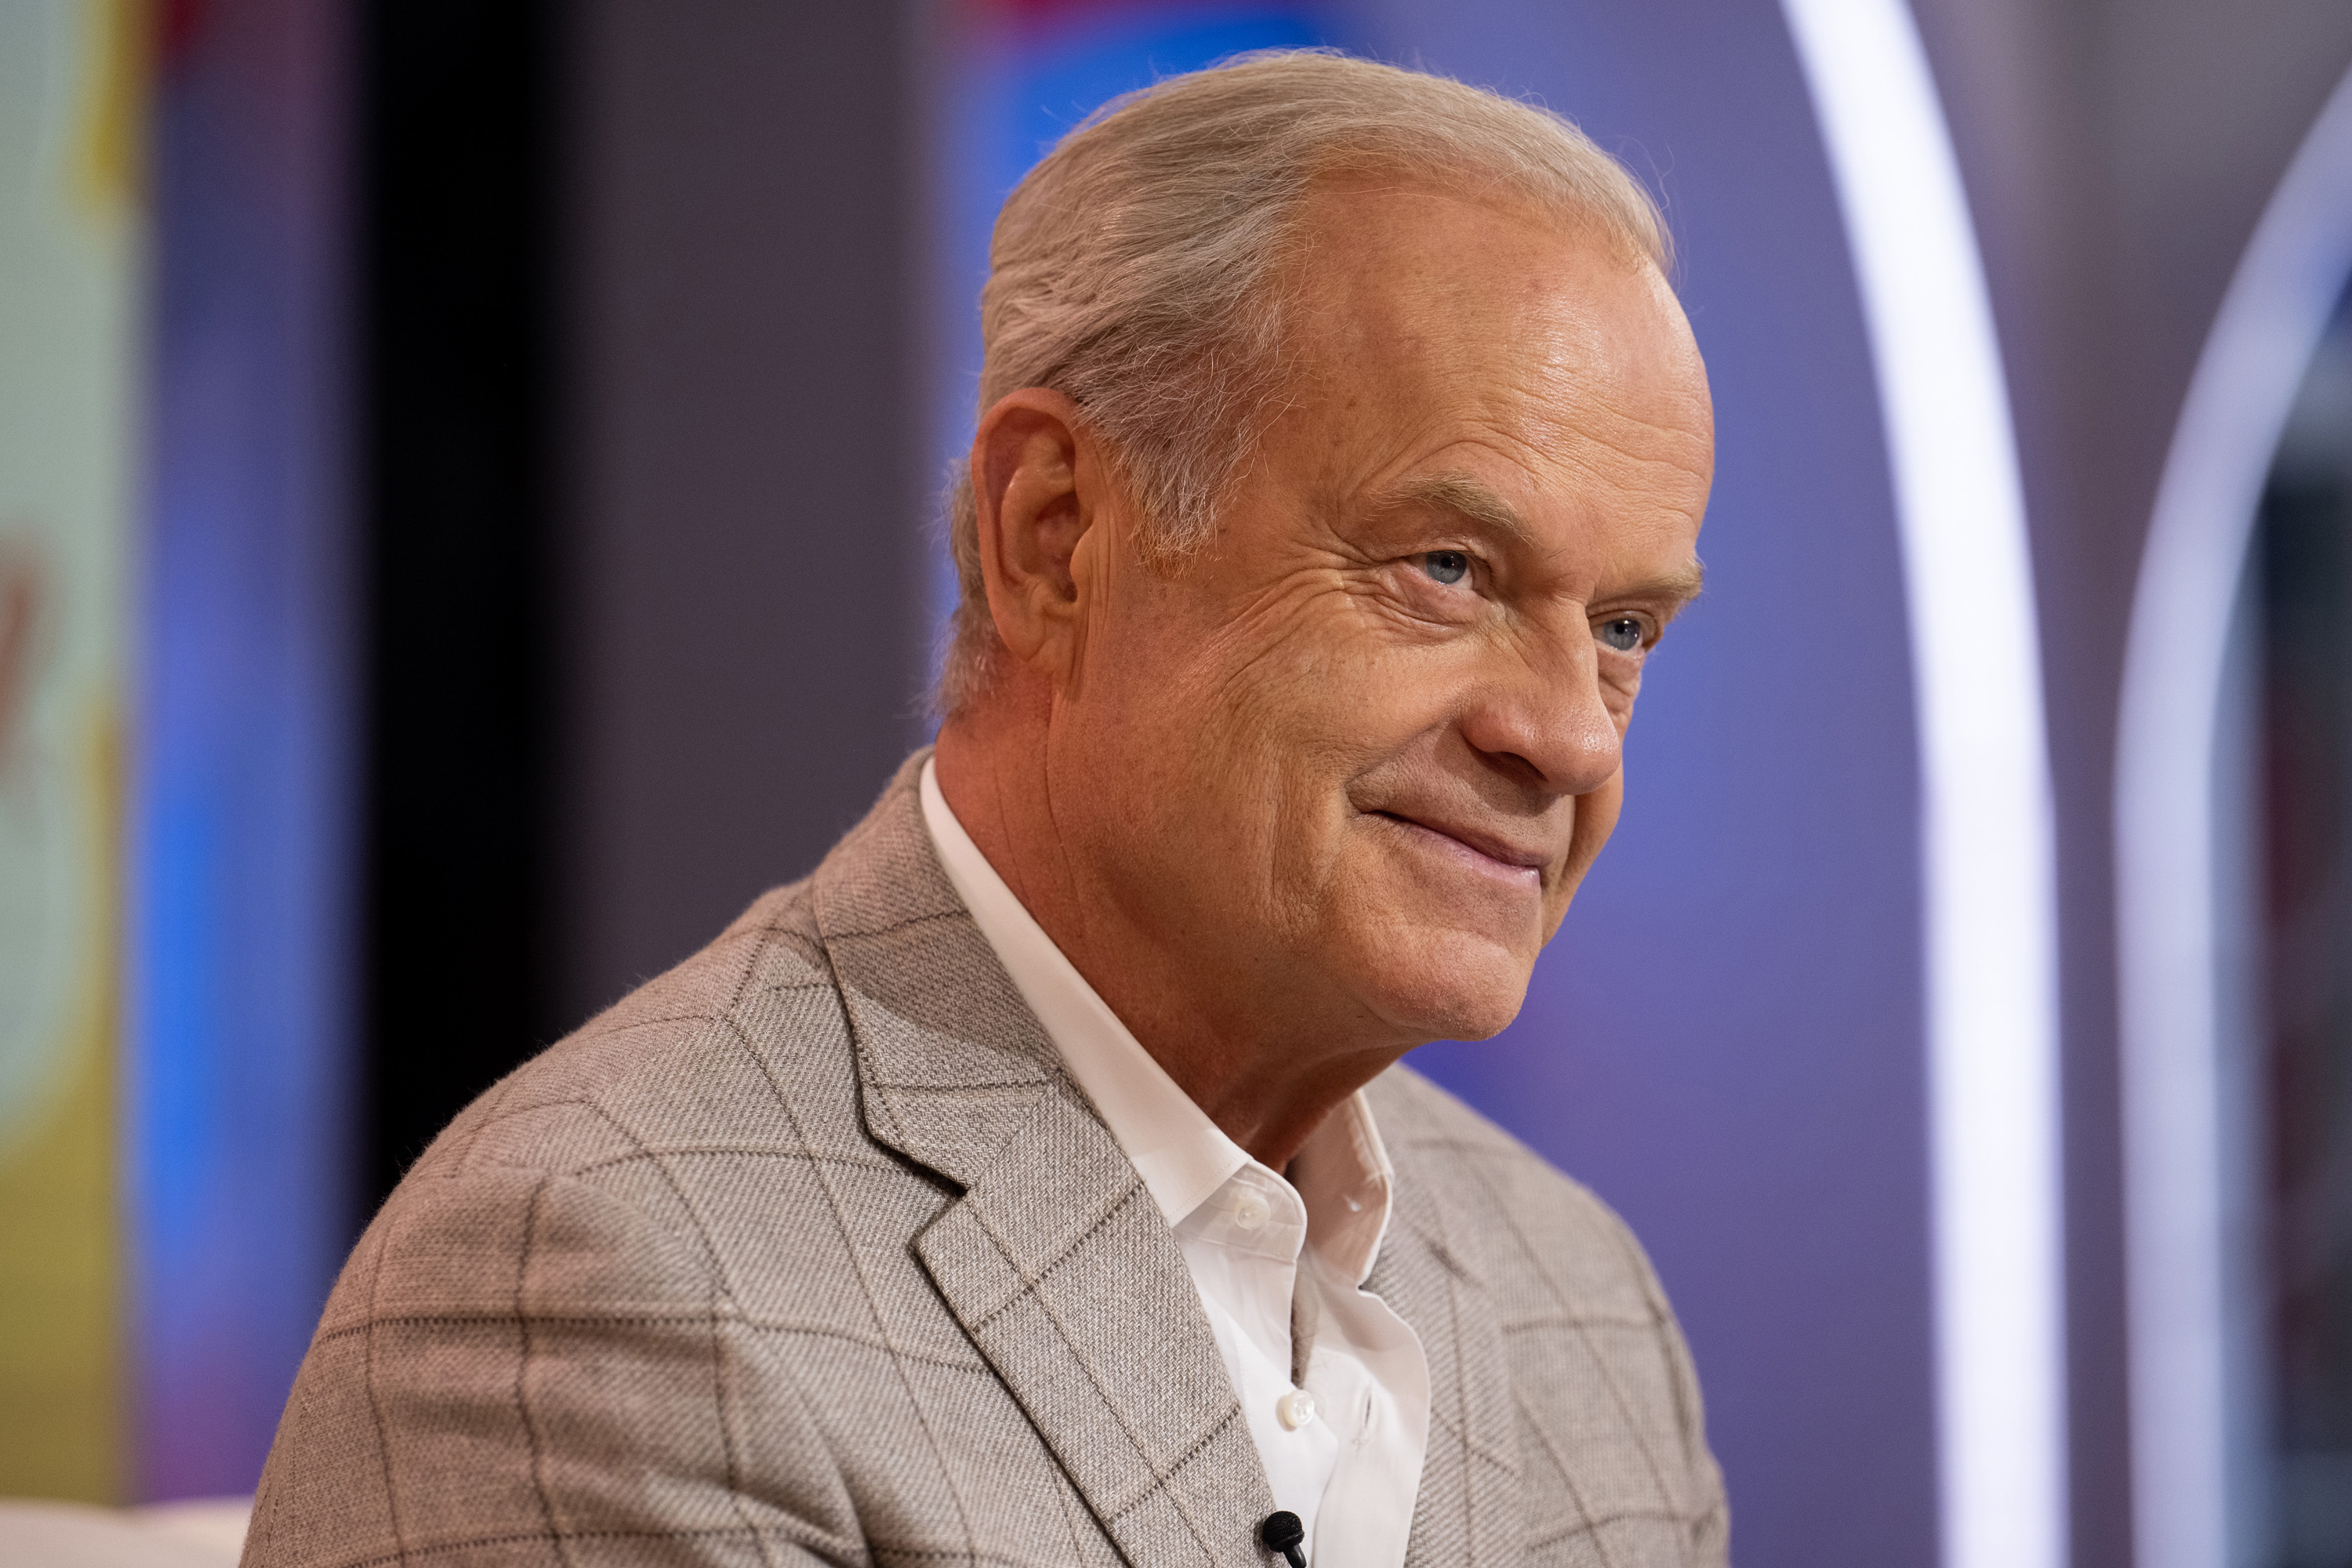 Kelsey Grammer on the "Today" show, on February 15, 2023 | Source: Getty Images